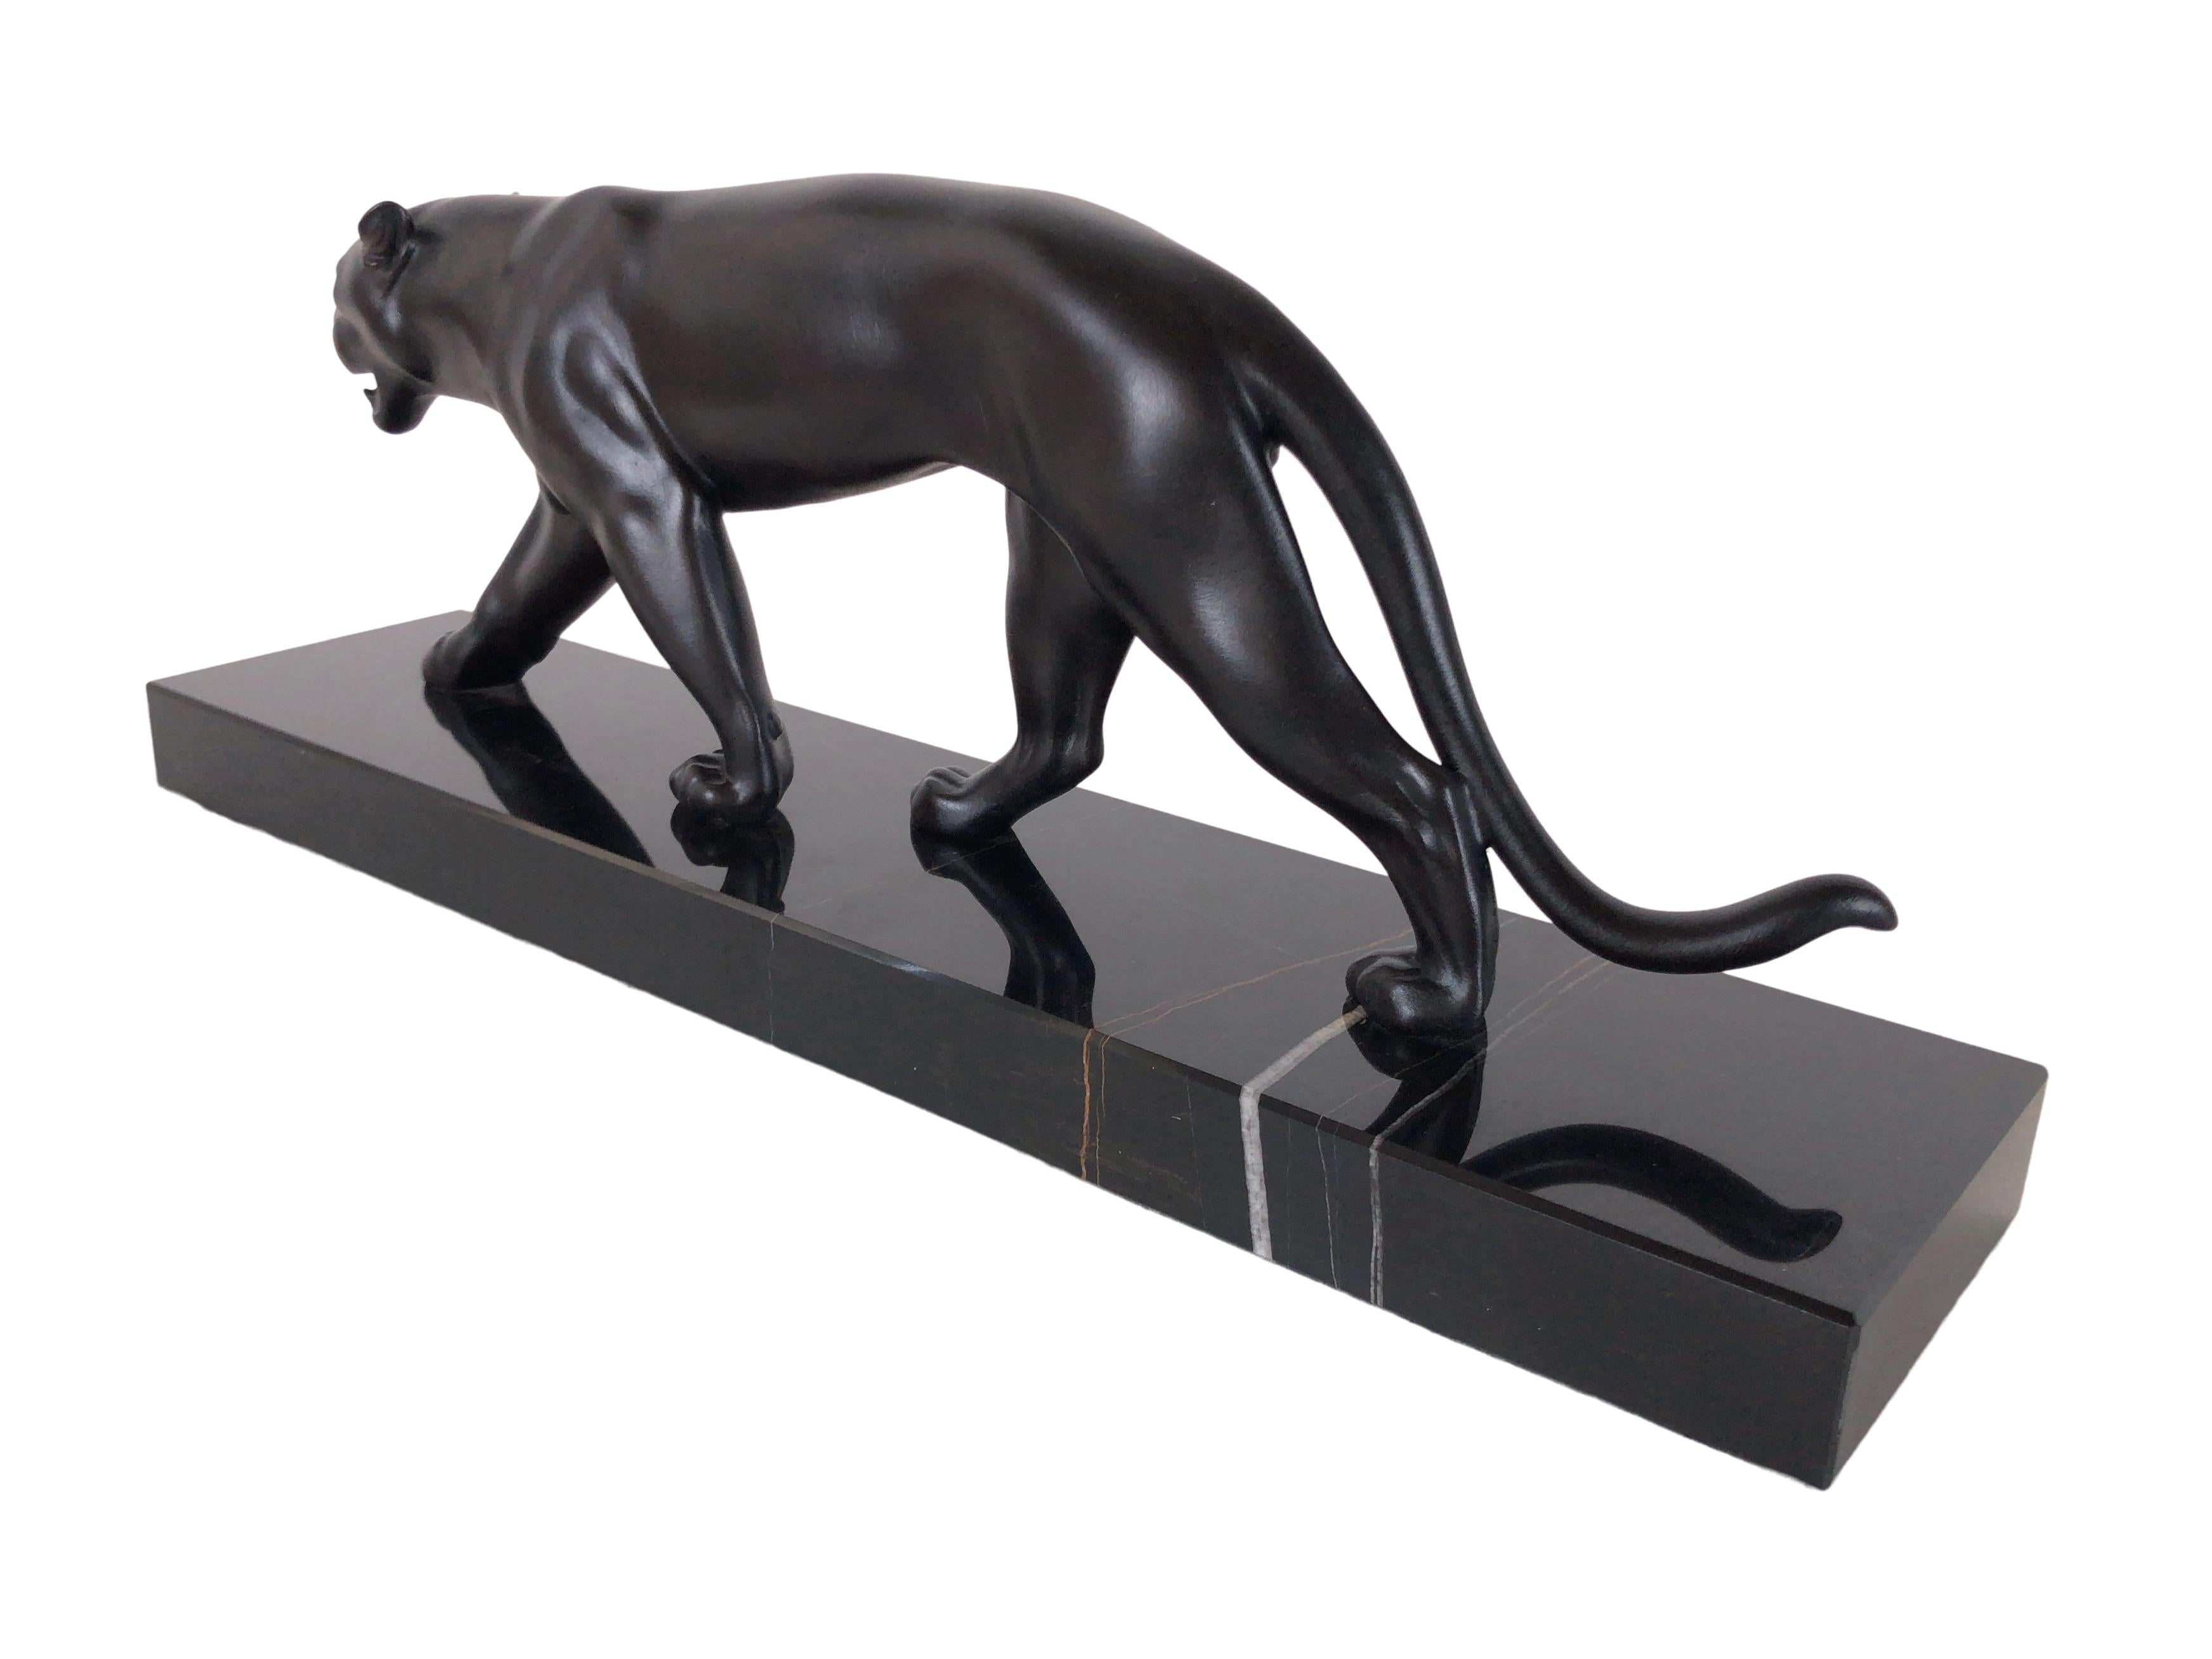 Spelter Ouganda Animal Sculpture Black Panther French Art Deco Style by Max Le Verrier For Sale